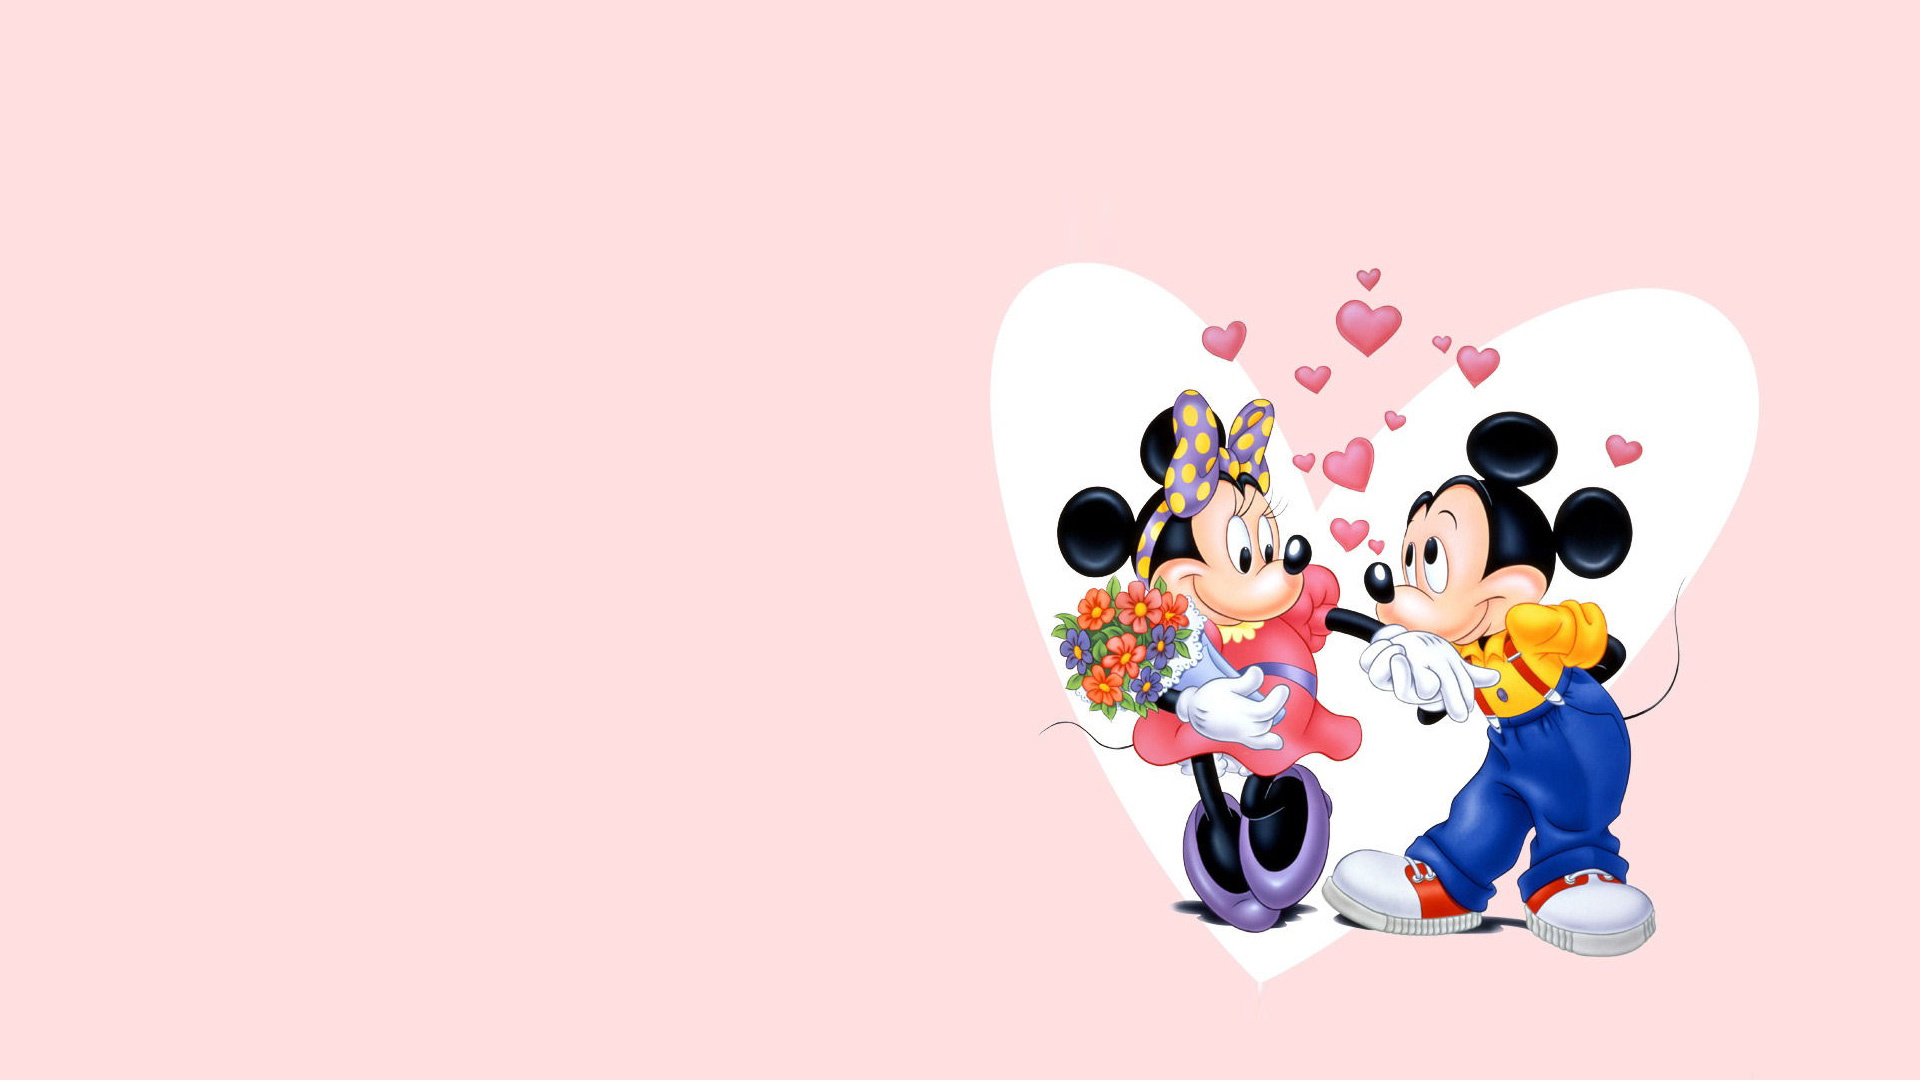 Images of Mickey Mouse characters, Iconic Disney figures, Nostalgic appeal, 1920x1080 Full HD Desktop